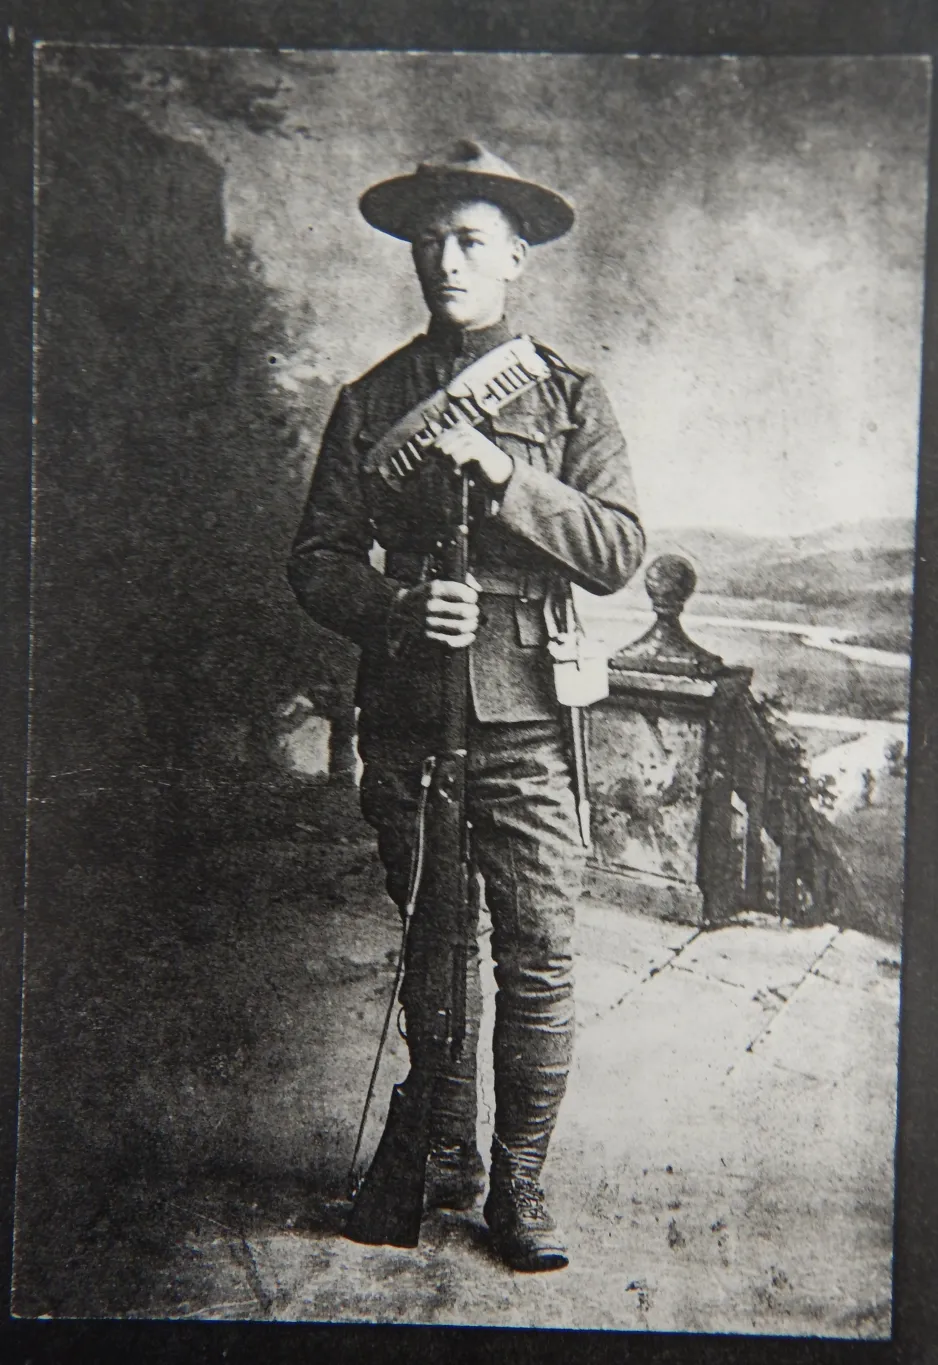 A black-and-white photo of a man posing in military garb holding a rifle 